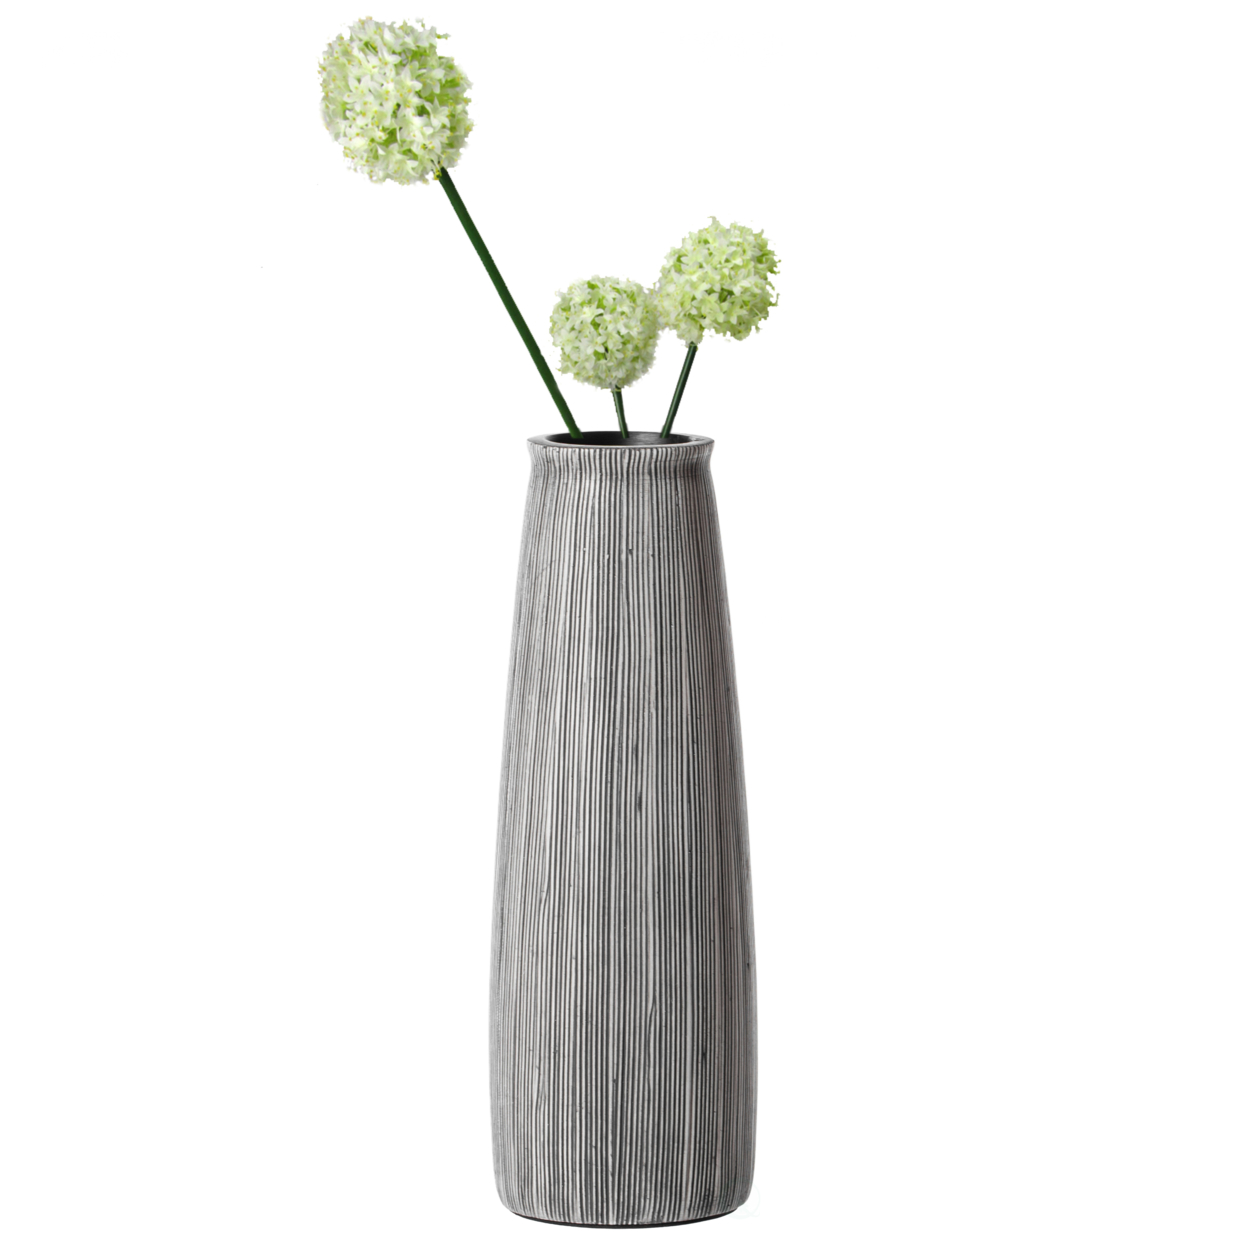 Decorative Modern Round Table Centerpiece Flower Vase With Gray Striped Design - Small